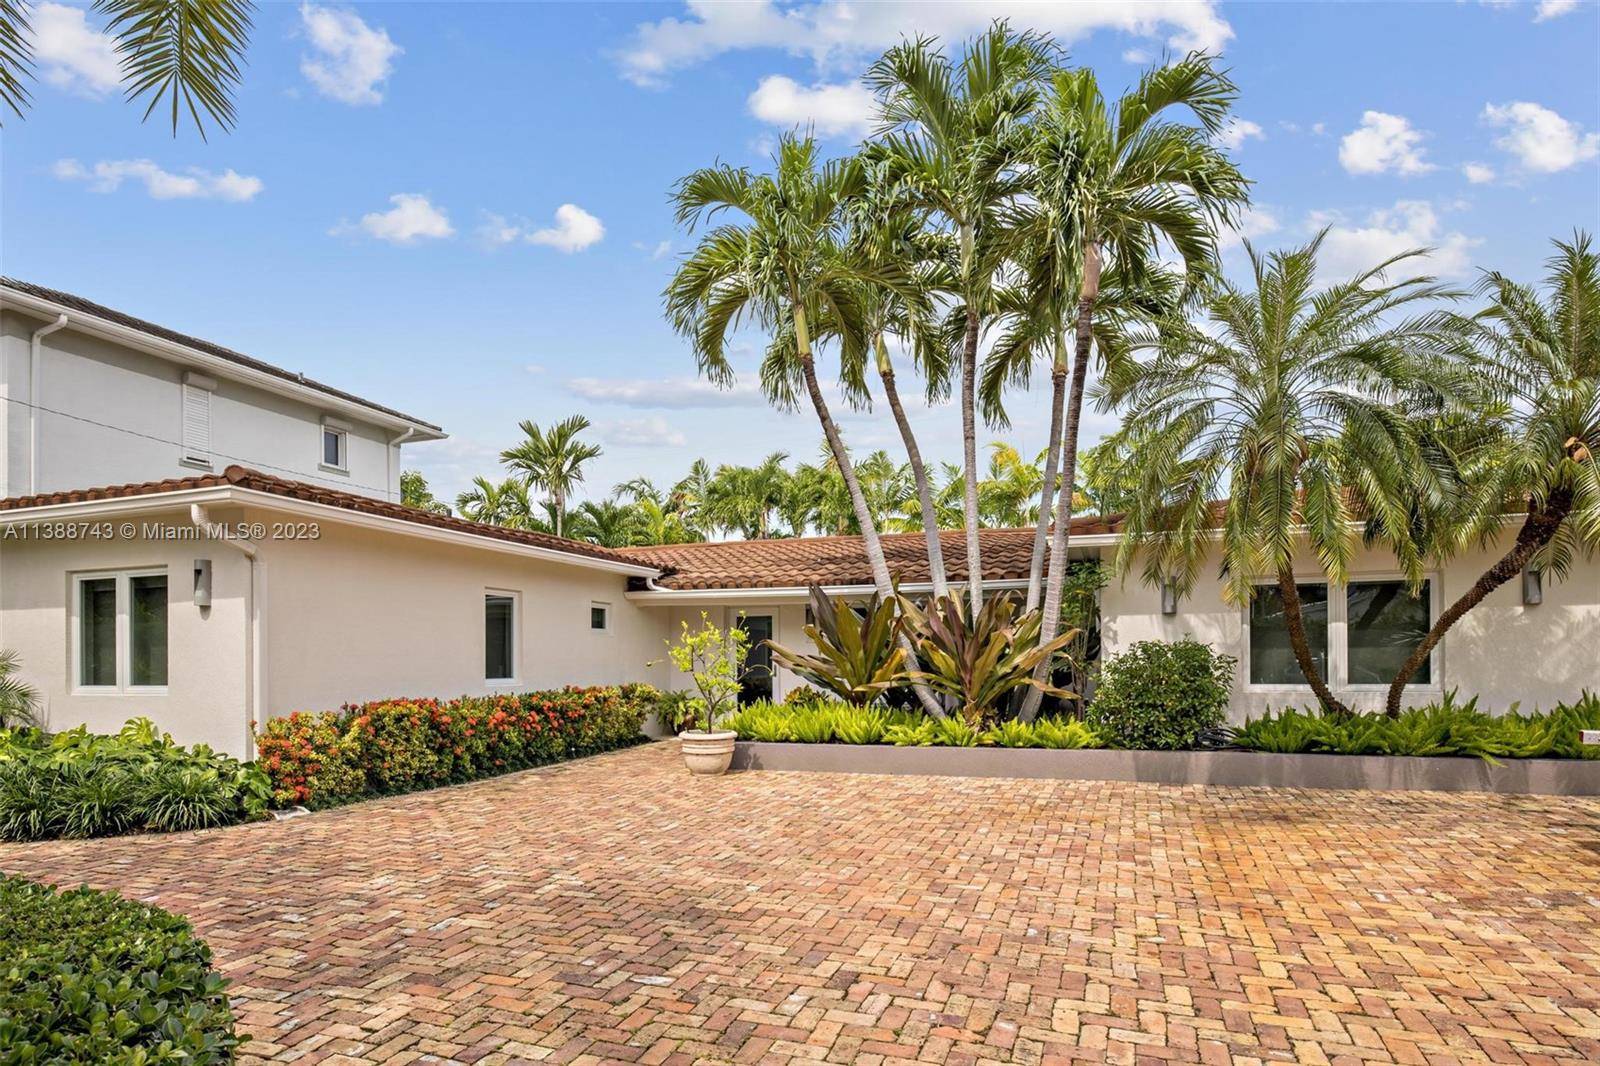 Welcome to this exceptional residence located in the prestigious Key Biscayne community.